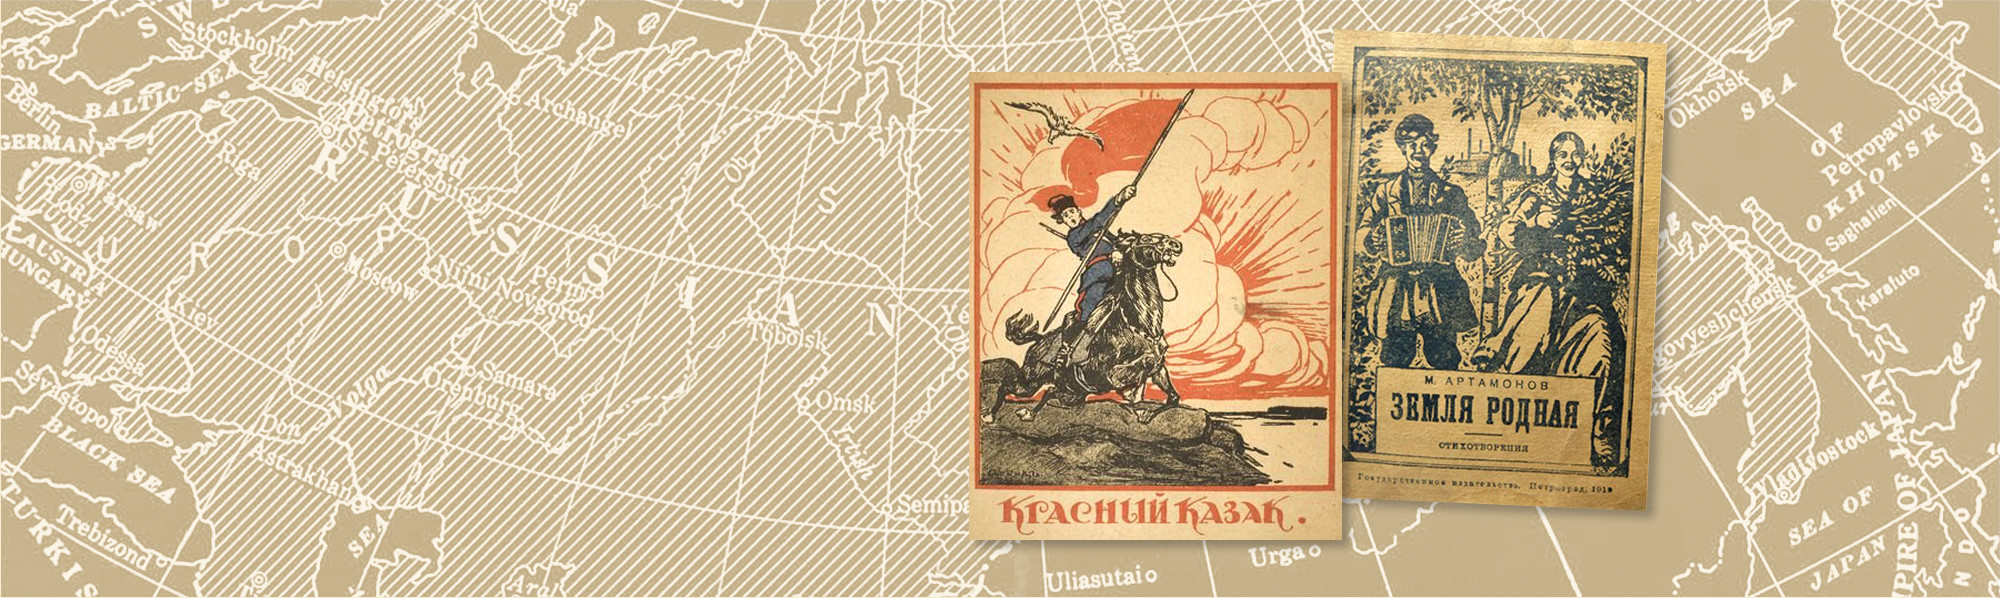 Mapping Imagined Geographies of Revolutionary Russia